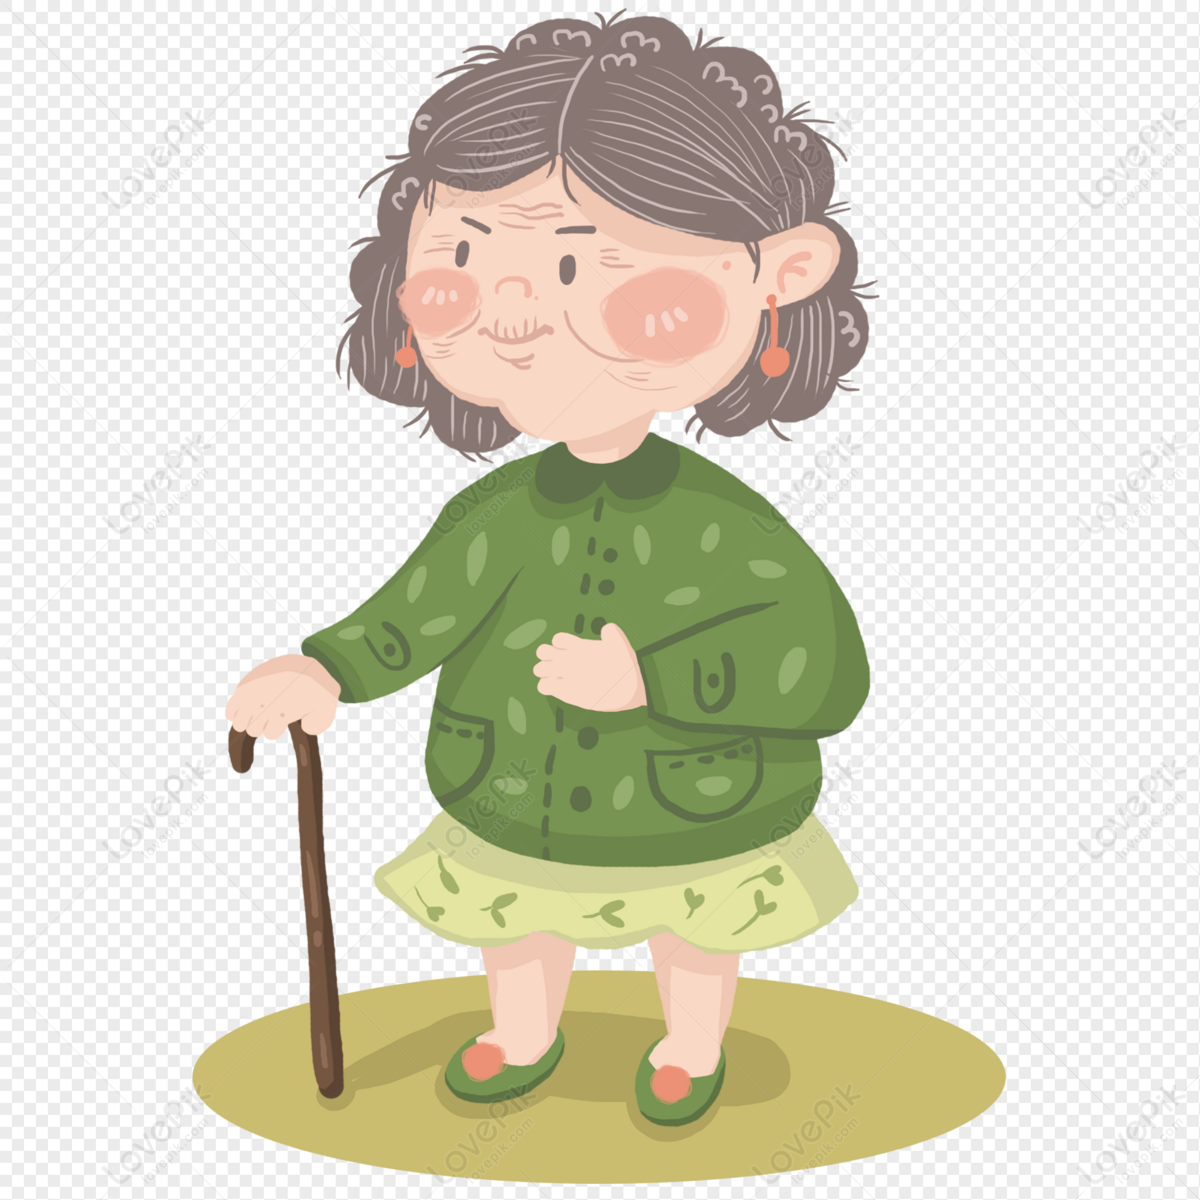 Standing Old Man PNG Free Download And Clipart Image For Free Download ...